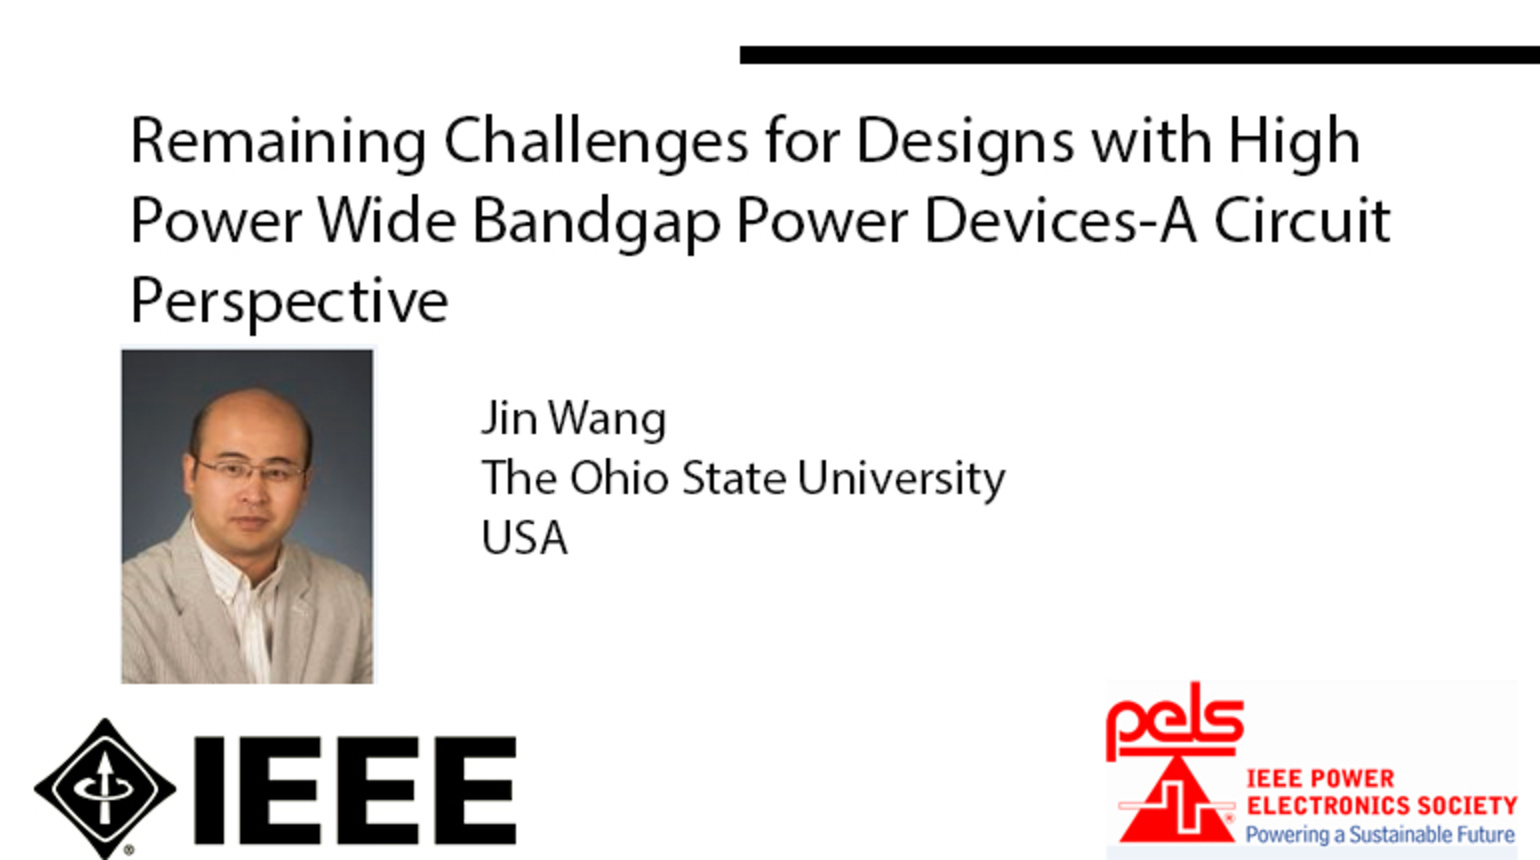 Remaining Challenges for Designs with High Power Wide Bandgap Power Devices - A Circuit Perspective